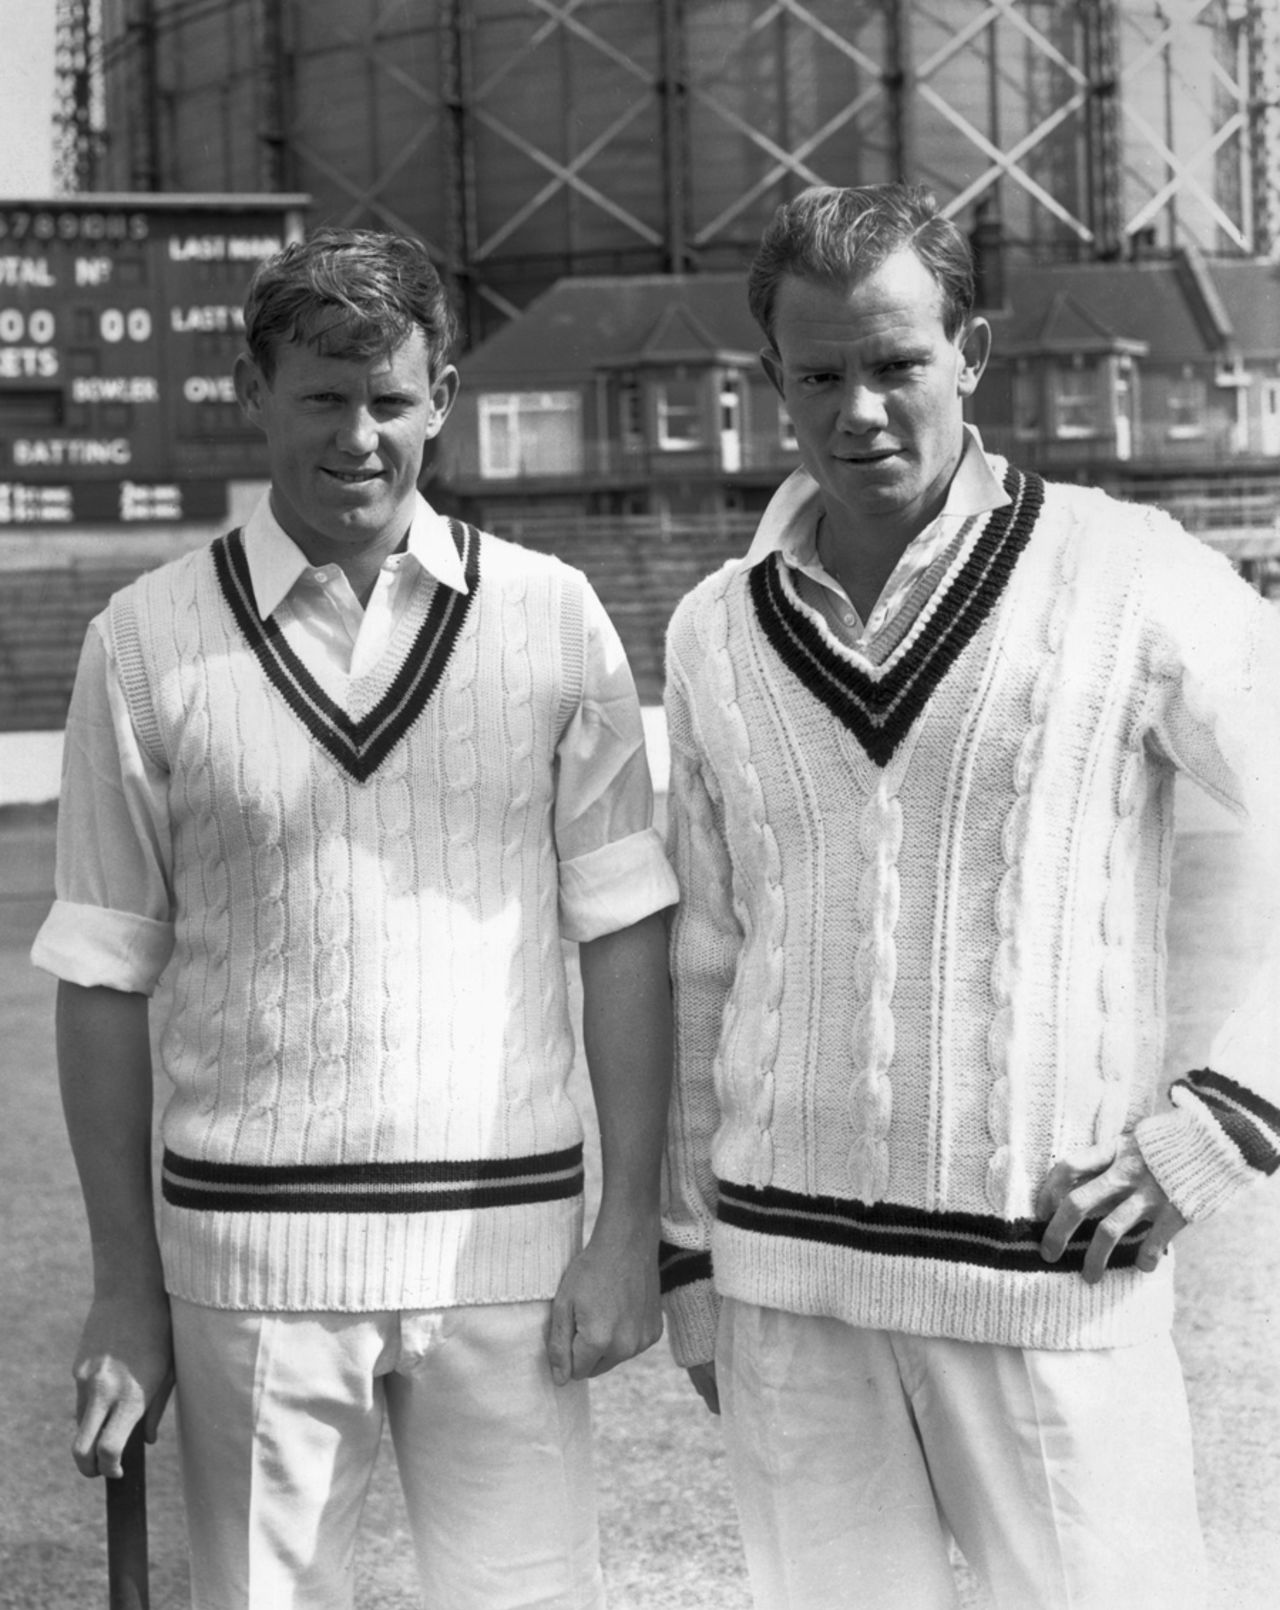 Graeme and Peter Pollock at the practice session, The Oval, August 25, 1965